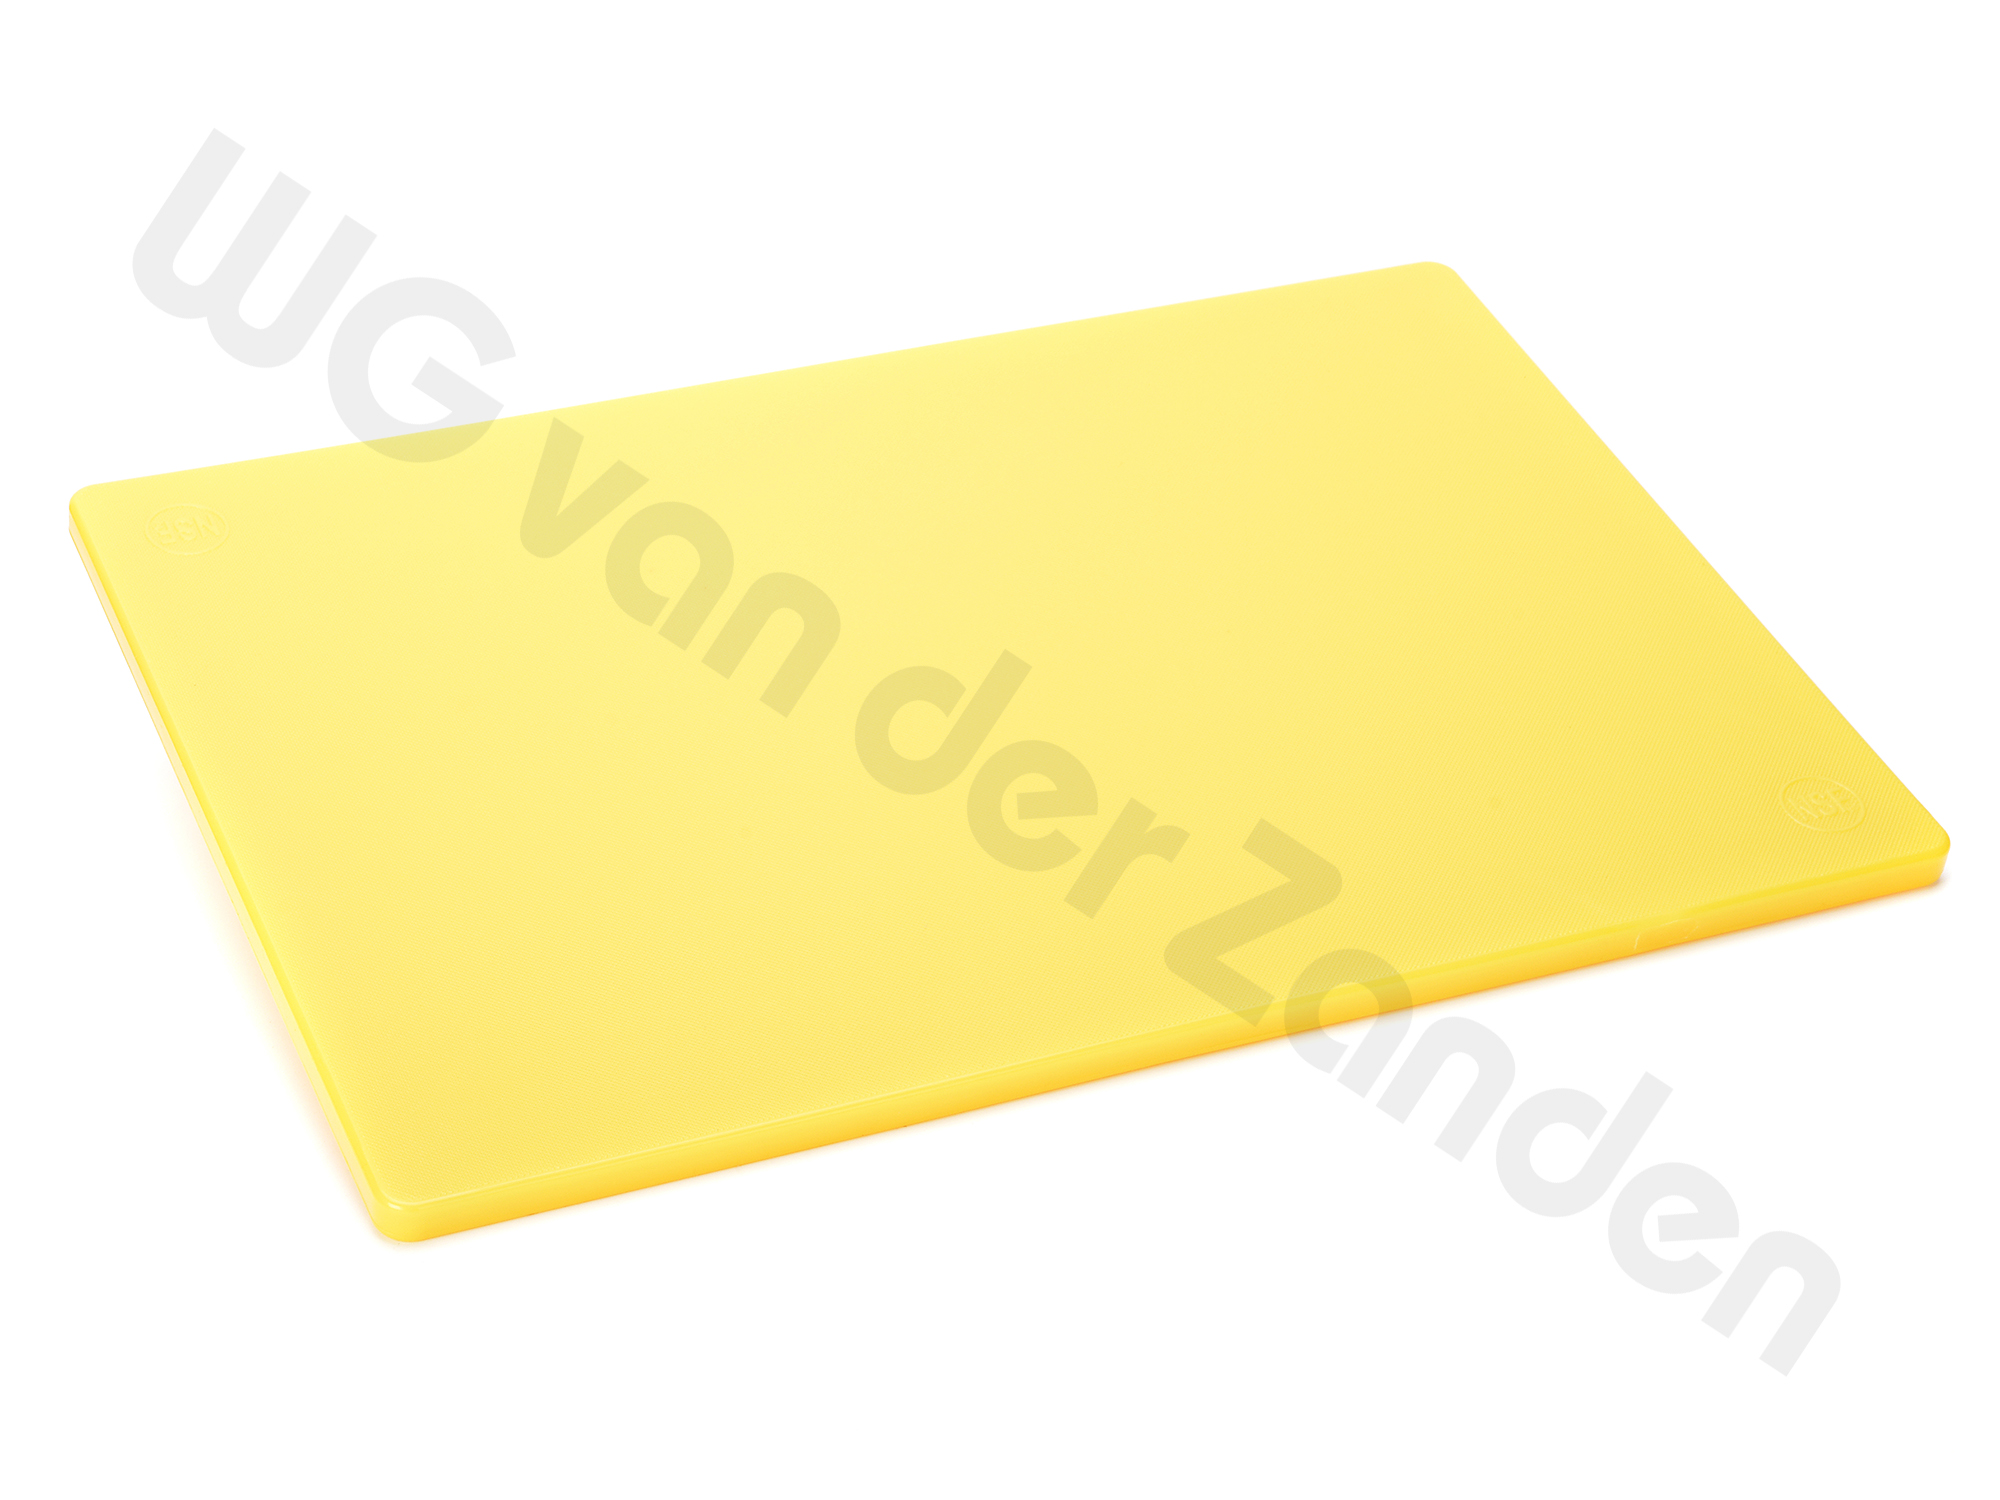 441345 CUTTING BOARD 45X30X1.3CM PLASTIC YELLOW (POULTRY)